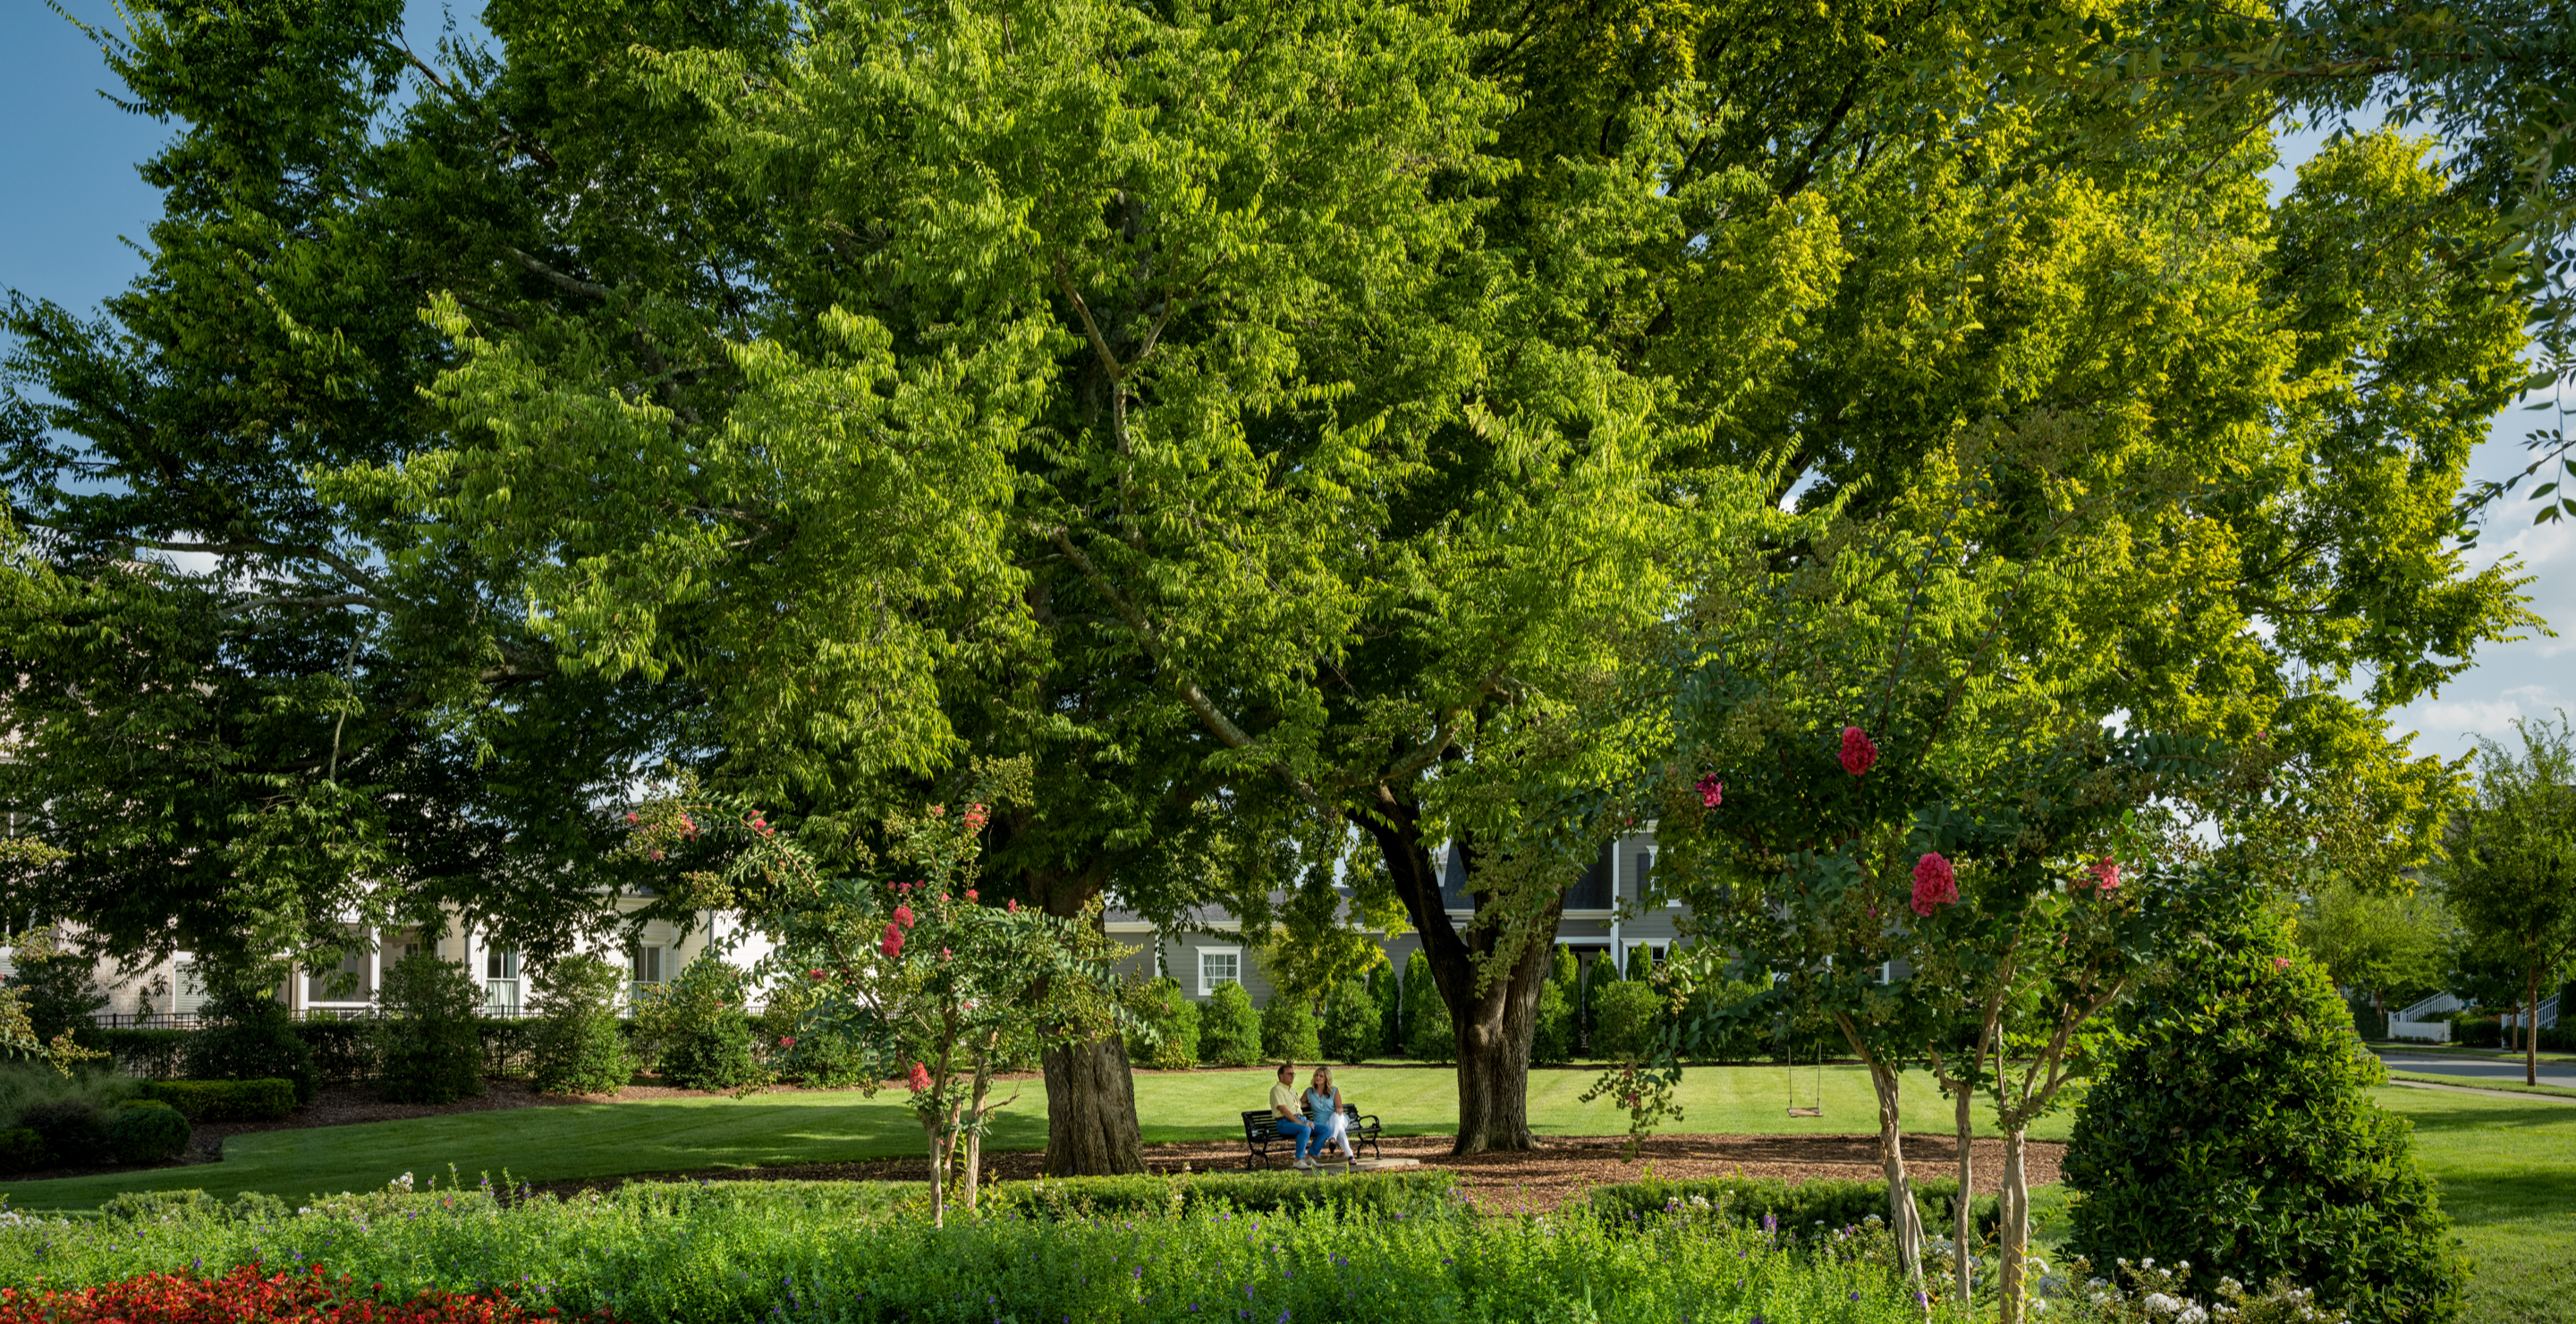 couple sitting on a bench under large trees in a garden